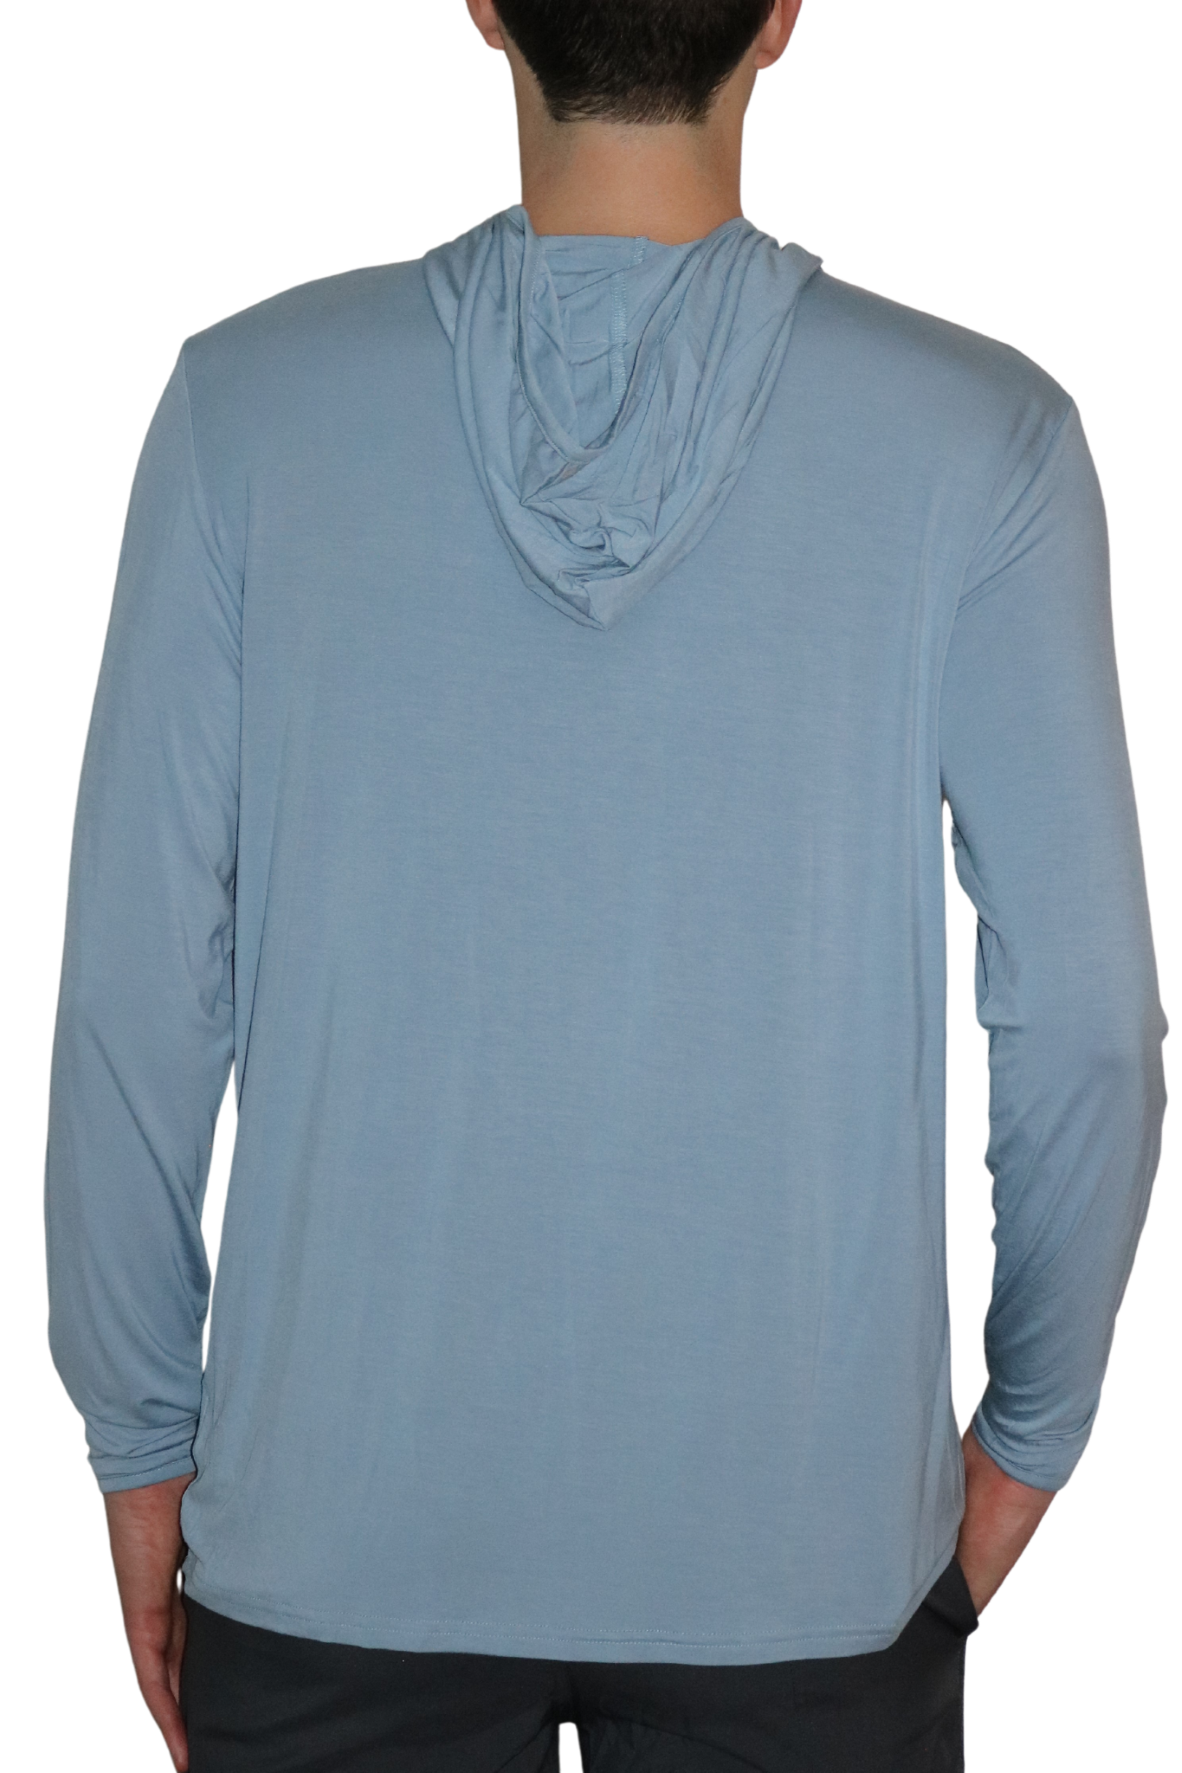 Back of the Angler Crossover Bamboo Hoodie in the Light Ocean Blue colorway.